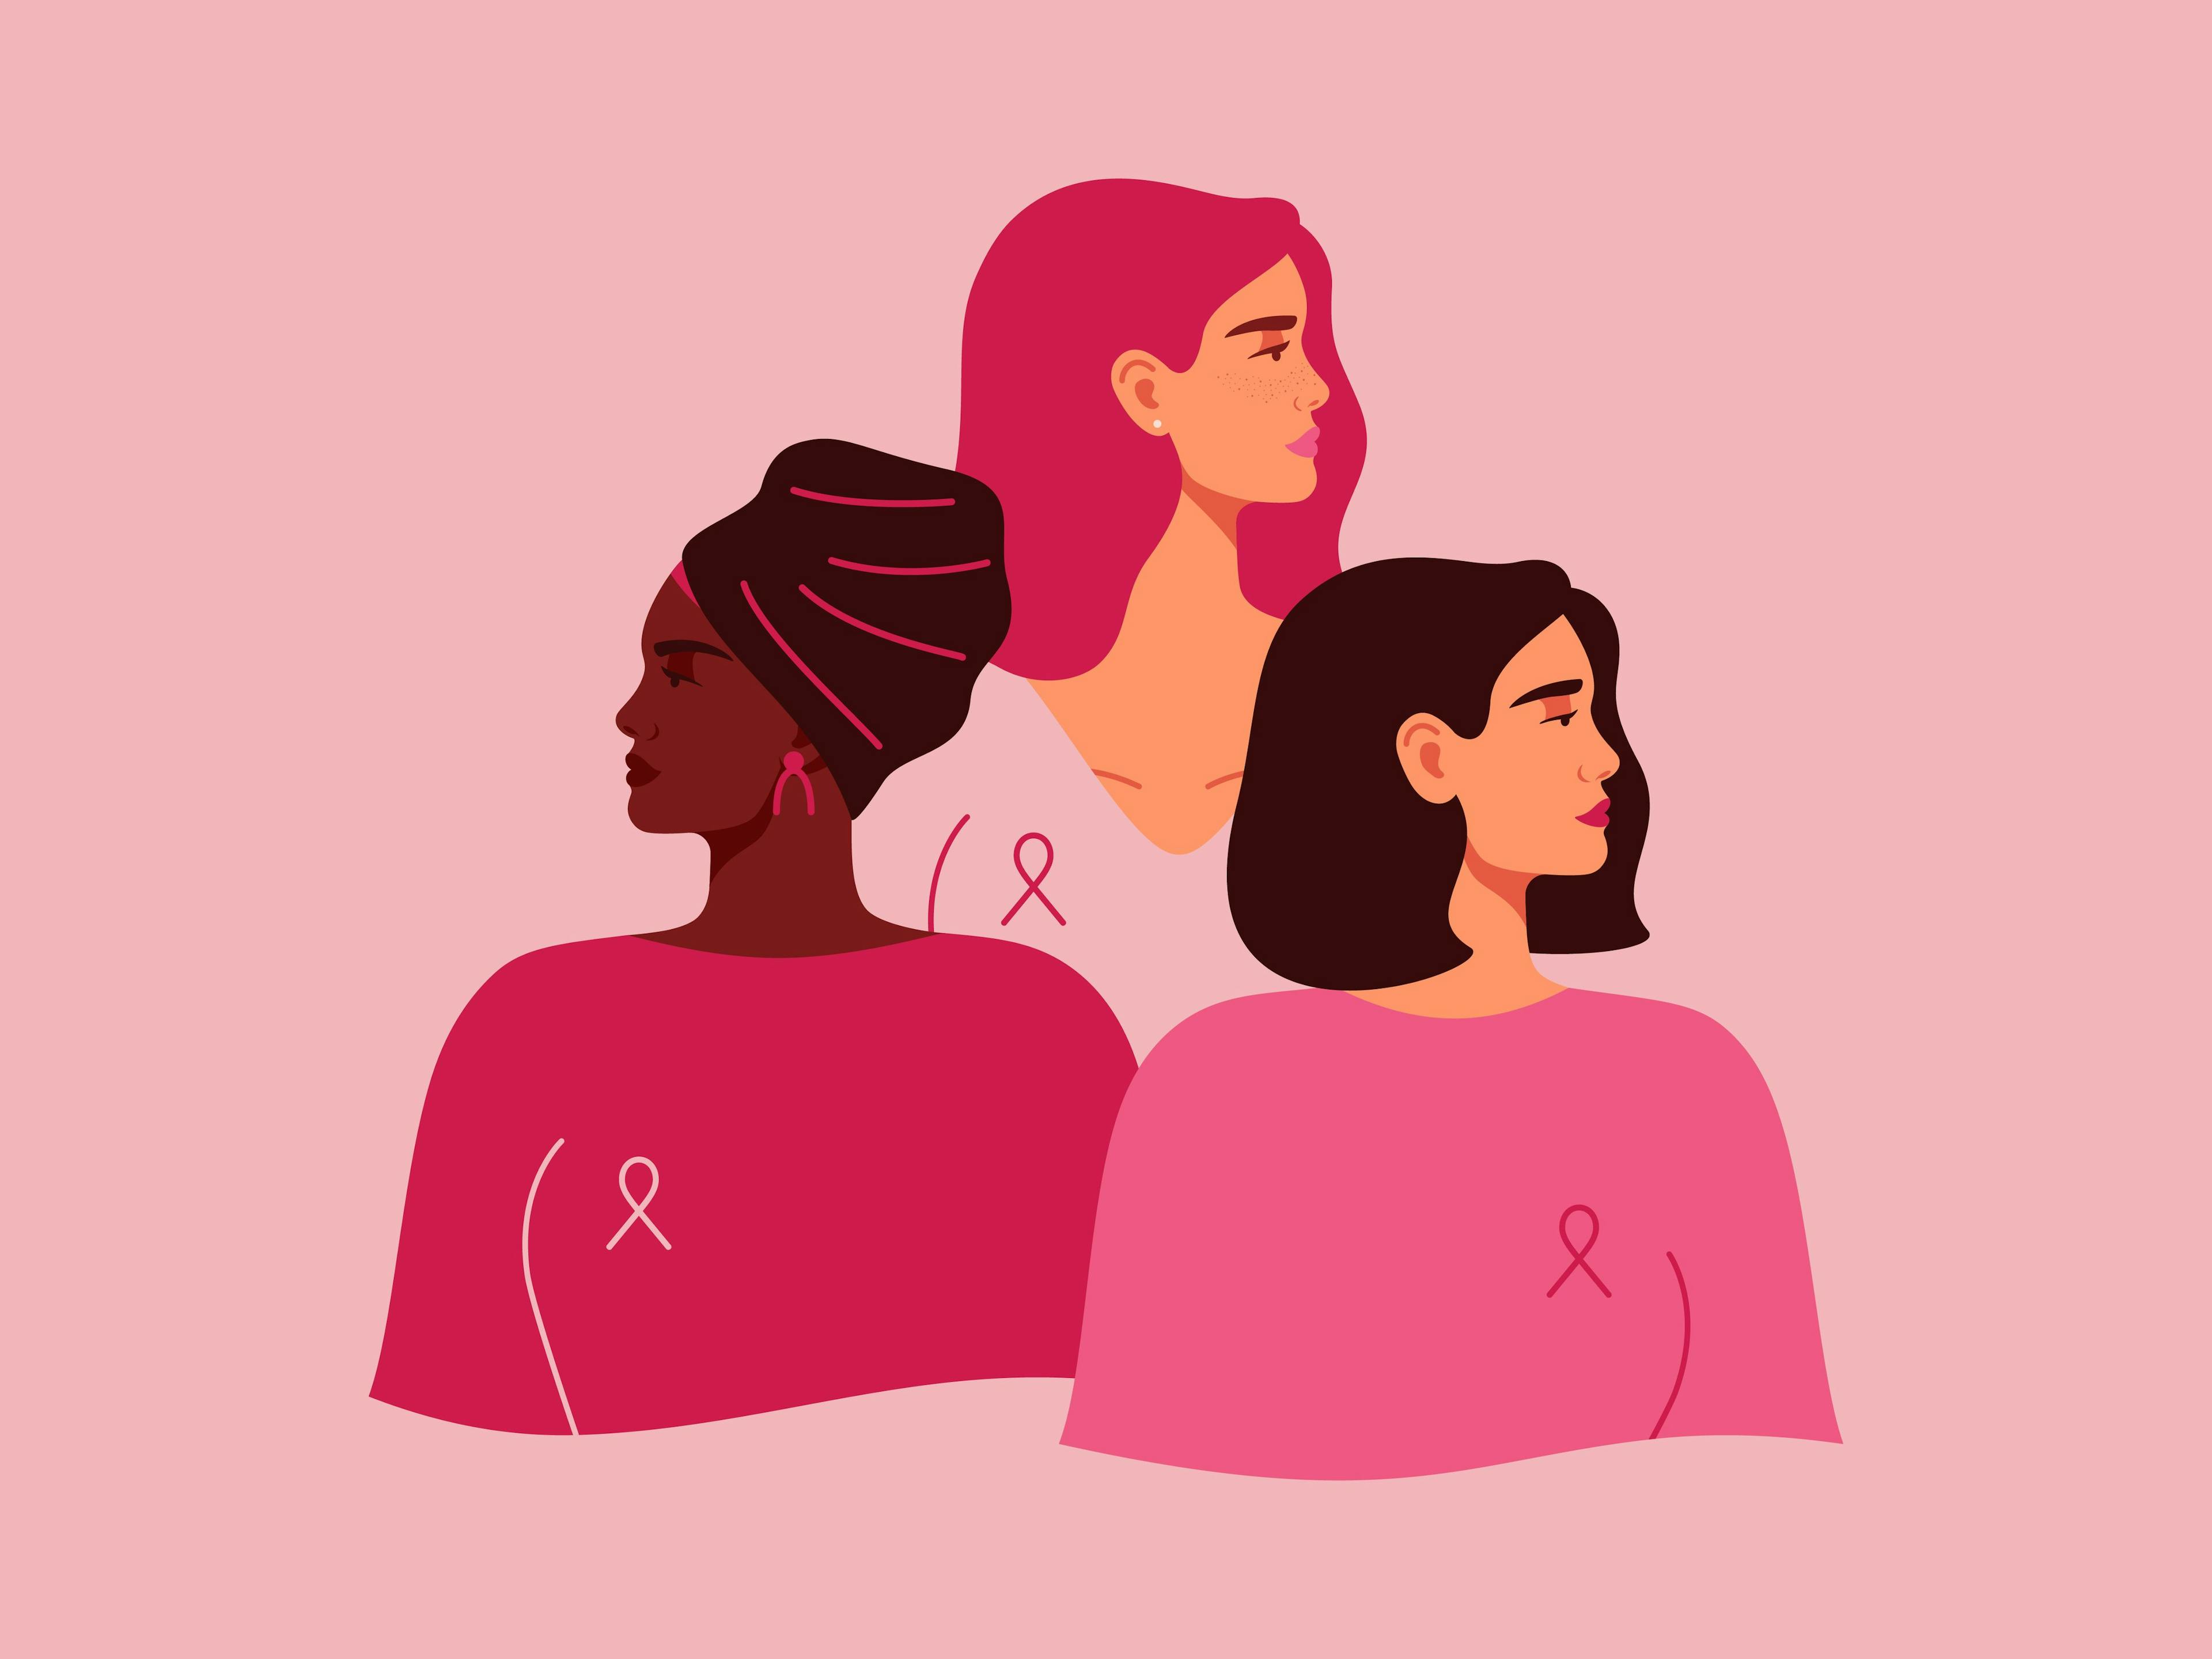 3 women with breast cancer of different ethnicities | Image Credit: Mary Long - stock.adobe.com